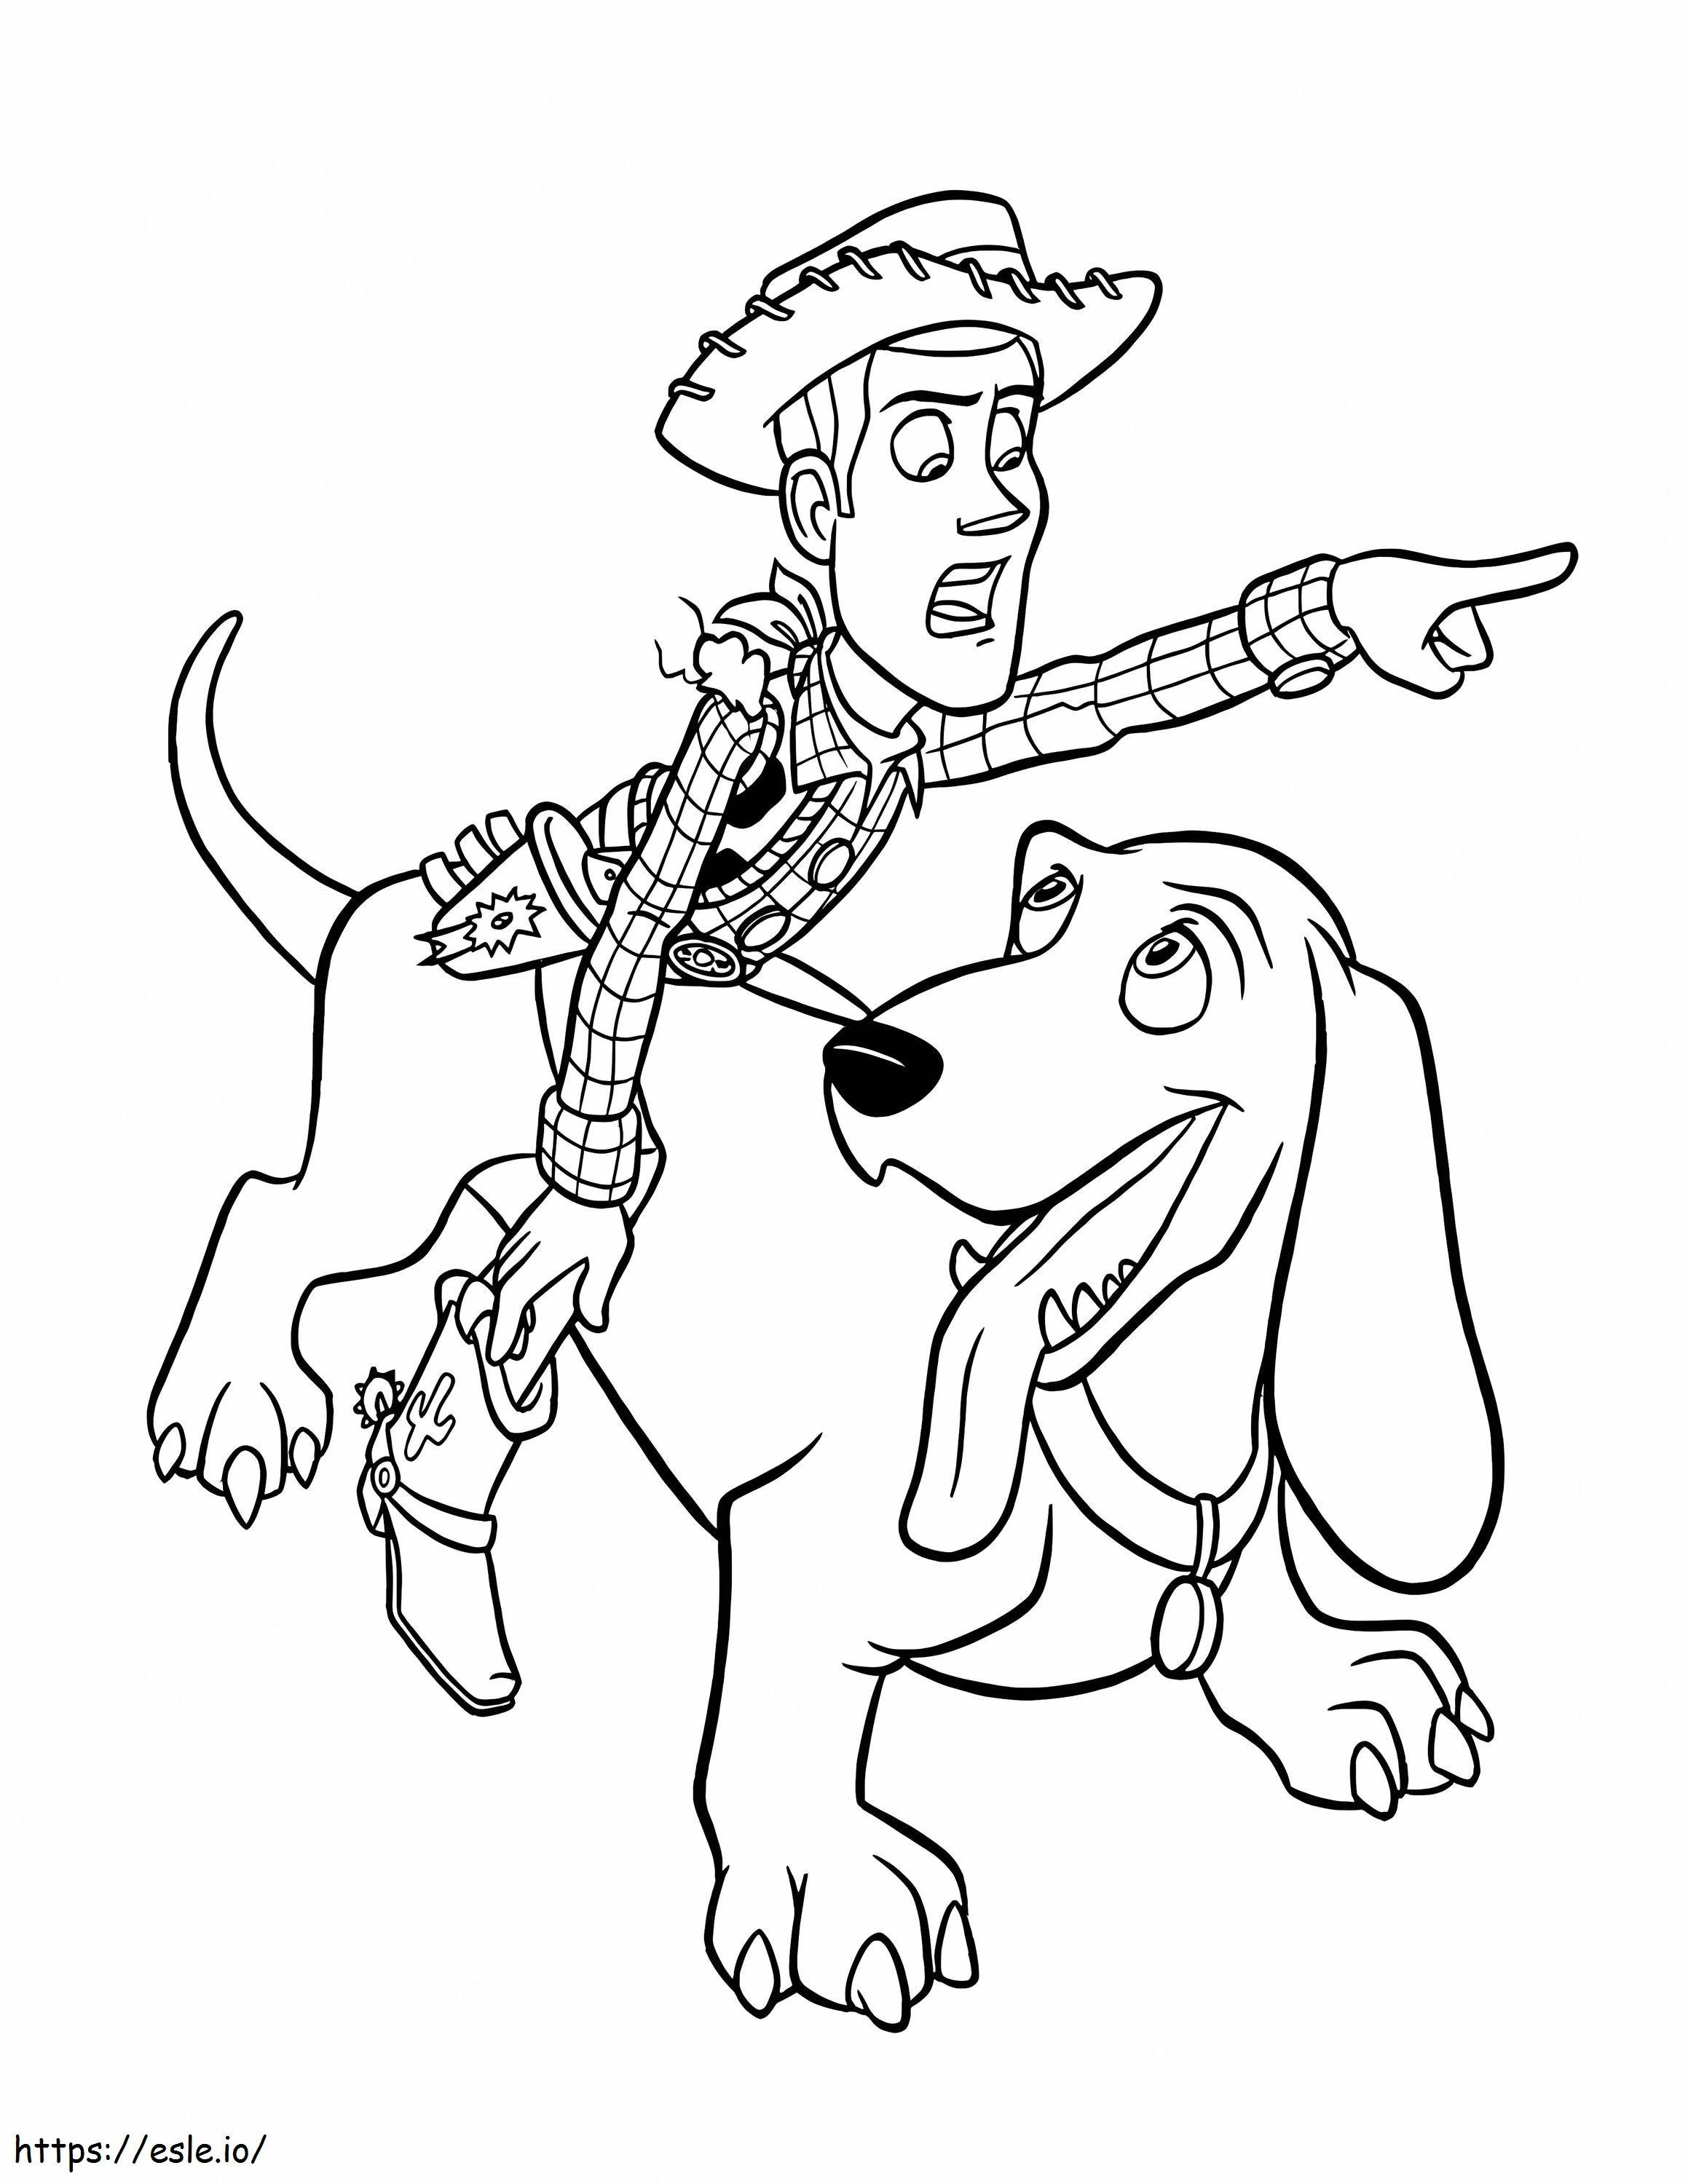 Woody Riding Dog coloring page